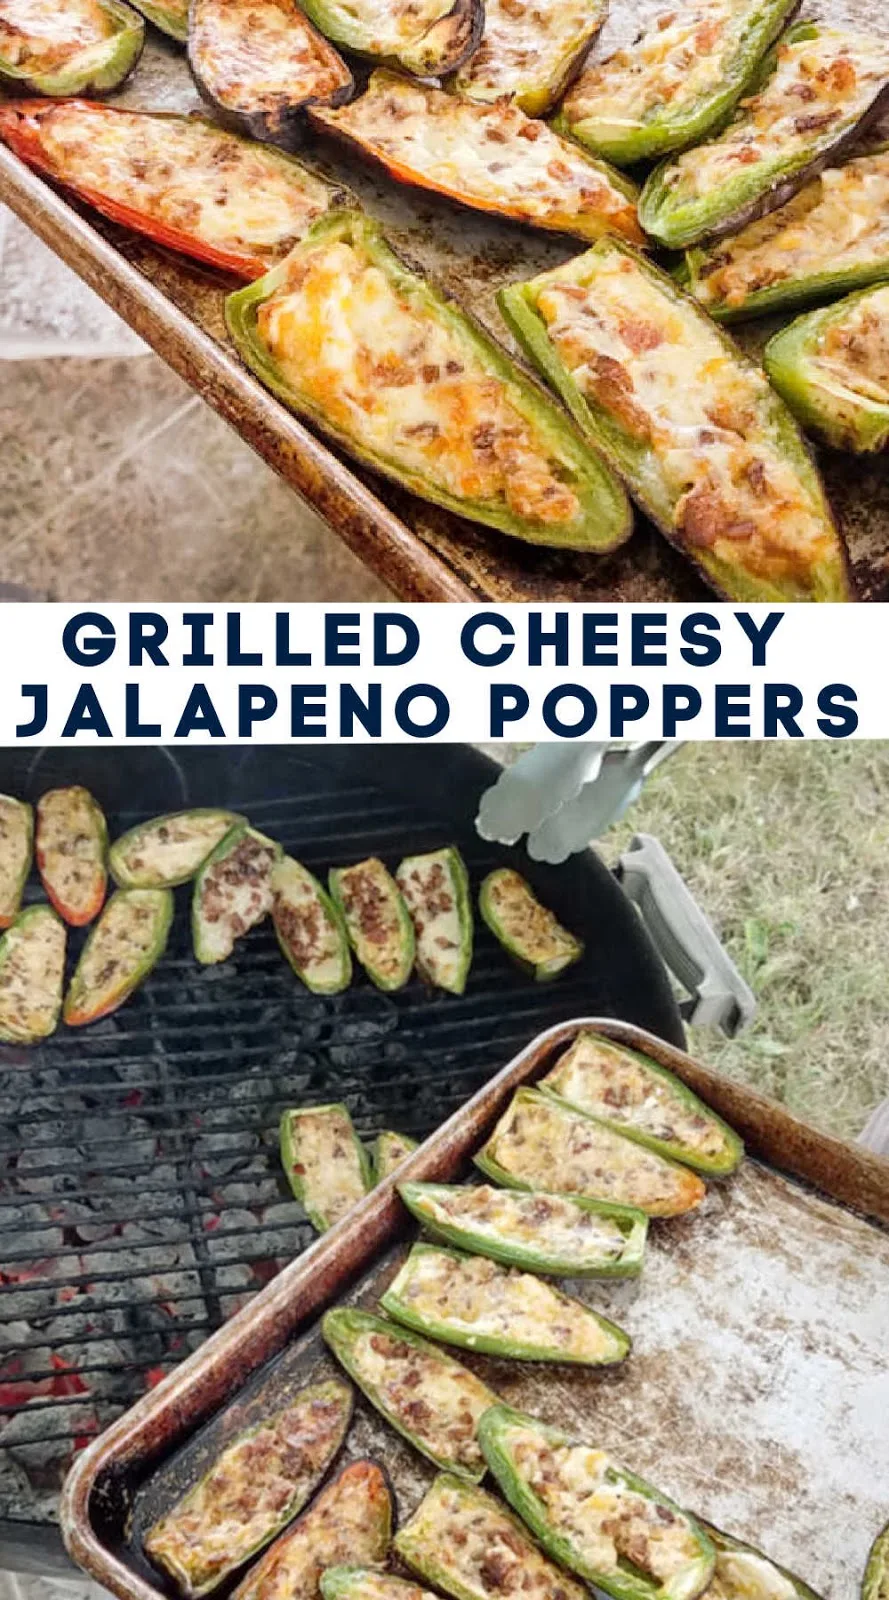 Jalapenos stuffed with gooey cheese and plenty of bacon make for the perfect part spicy part cream all delicious appetizer. We have them almost every week during the summer!